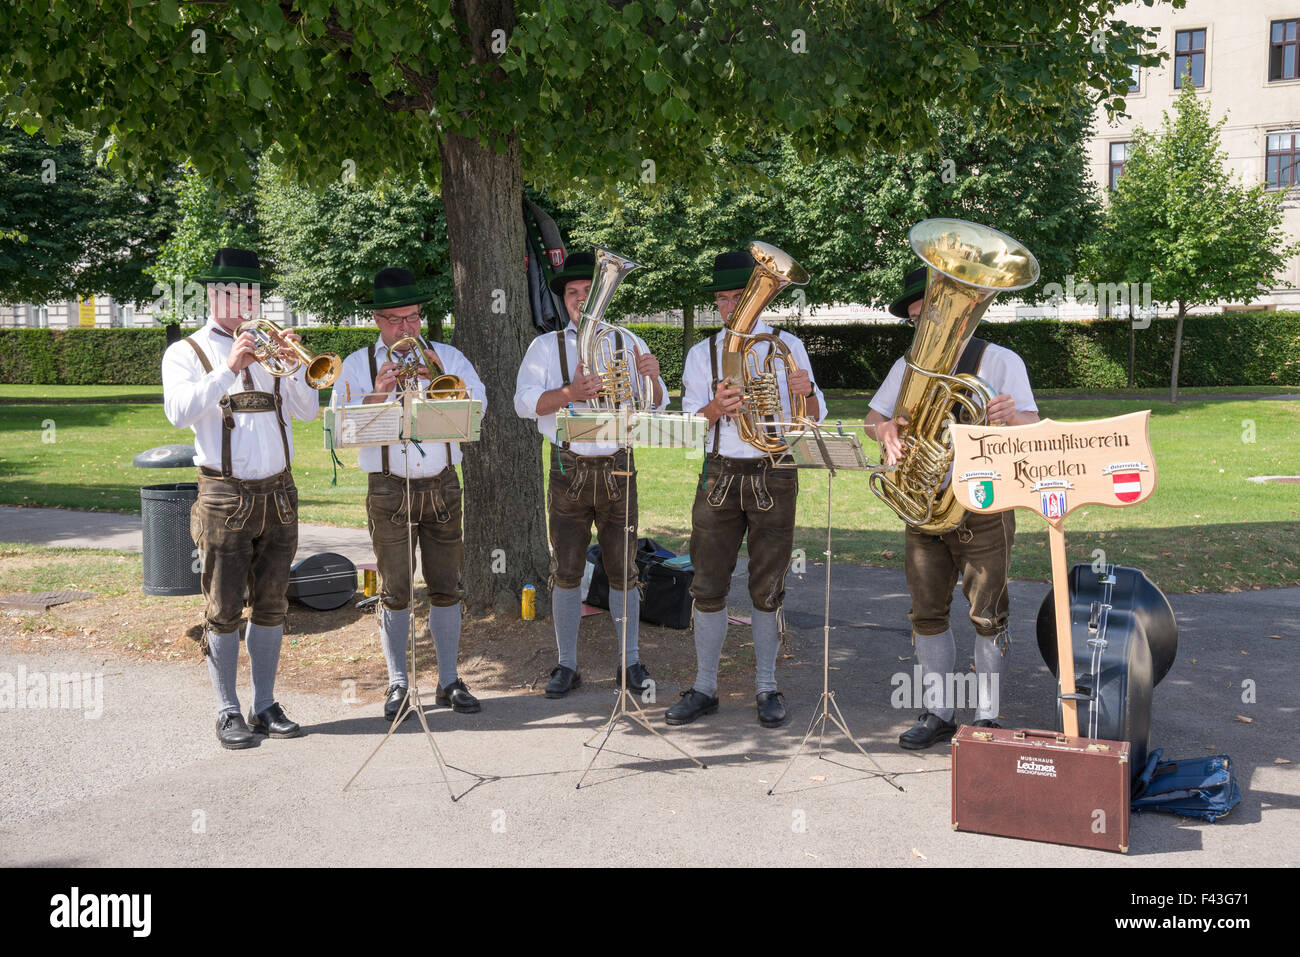 WIEN - AUGUST 1:street performers dressed Austrians perform classical music at the entrance of the Belvedere castle  on august 1 Stock Photo